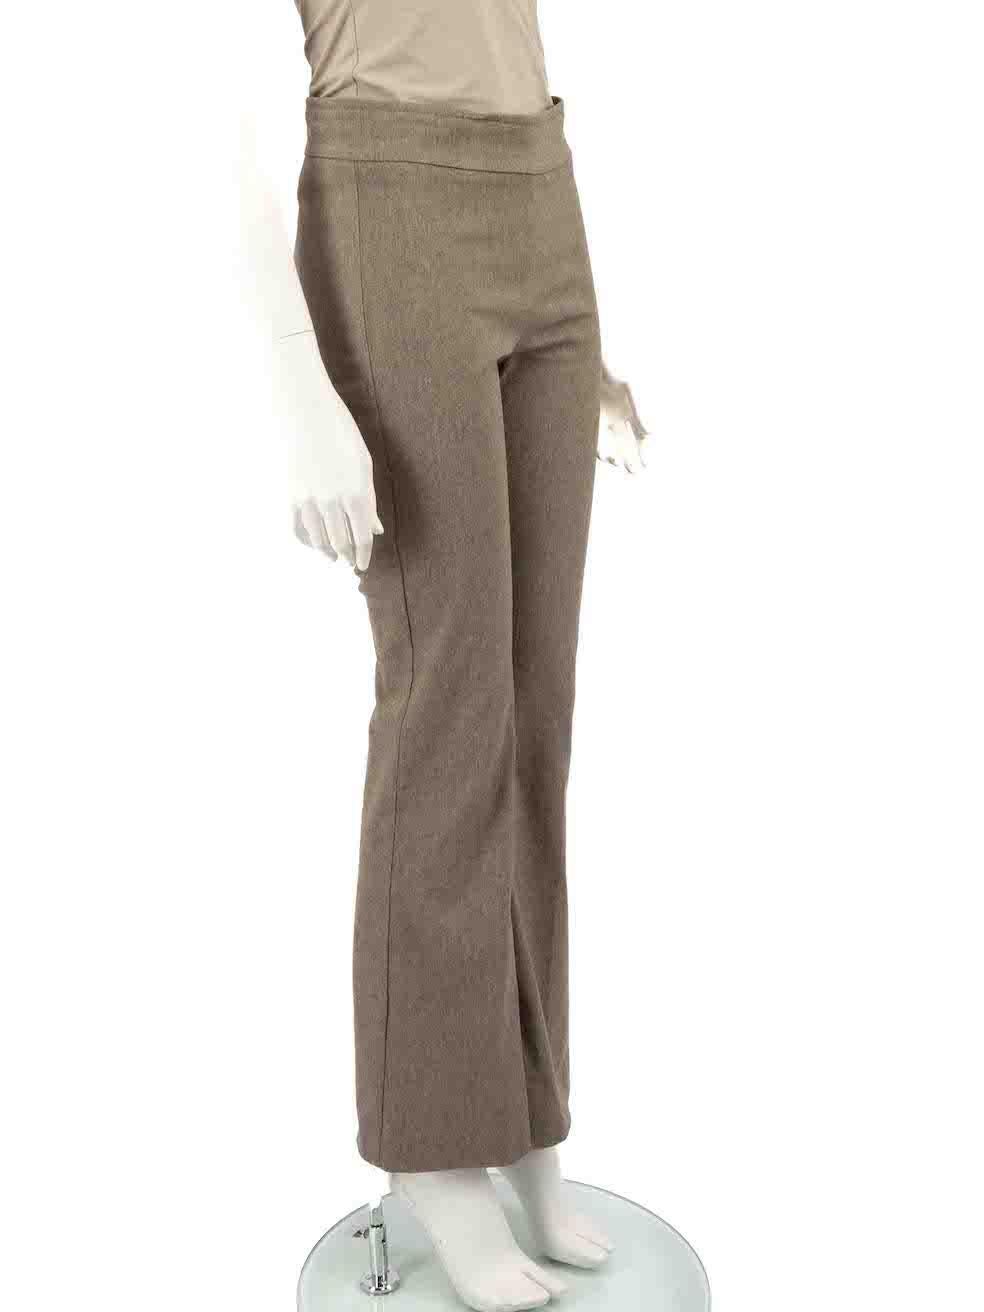 CONDITION is Very good. Hardly any visible wear to trousers is evident on this used Divine Cashmere designer resale item.
 
 
 
 Details
 
 
 Grey
 
 Viscose
 
 Trousers
 
 Straight leg
 
 Skinny fit
 
 Stretchy waistband
 
 
 
 
 
 Made in USA
 
 
